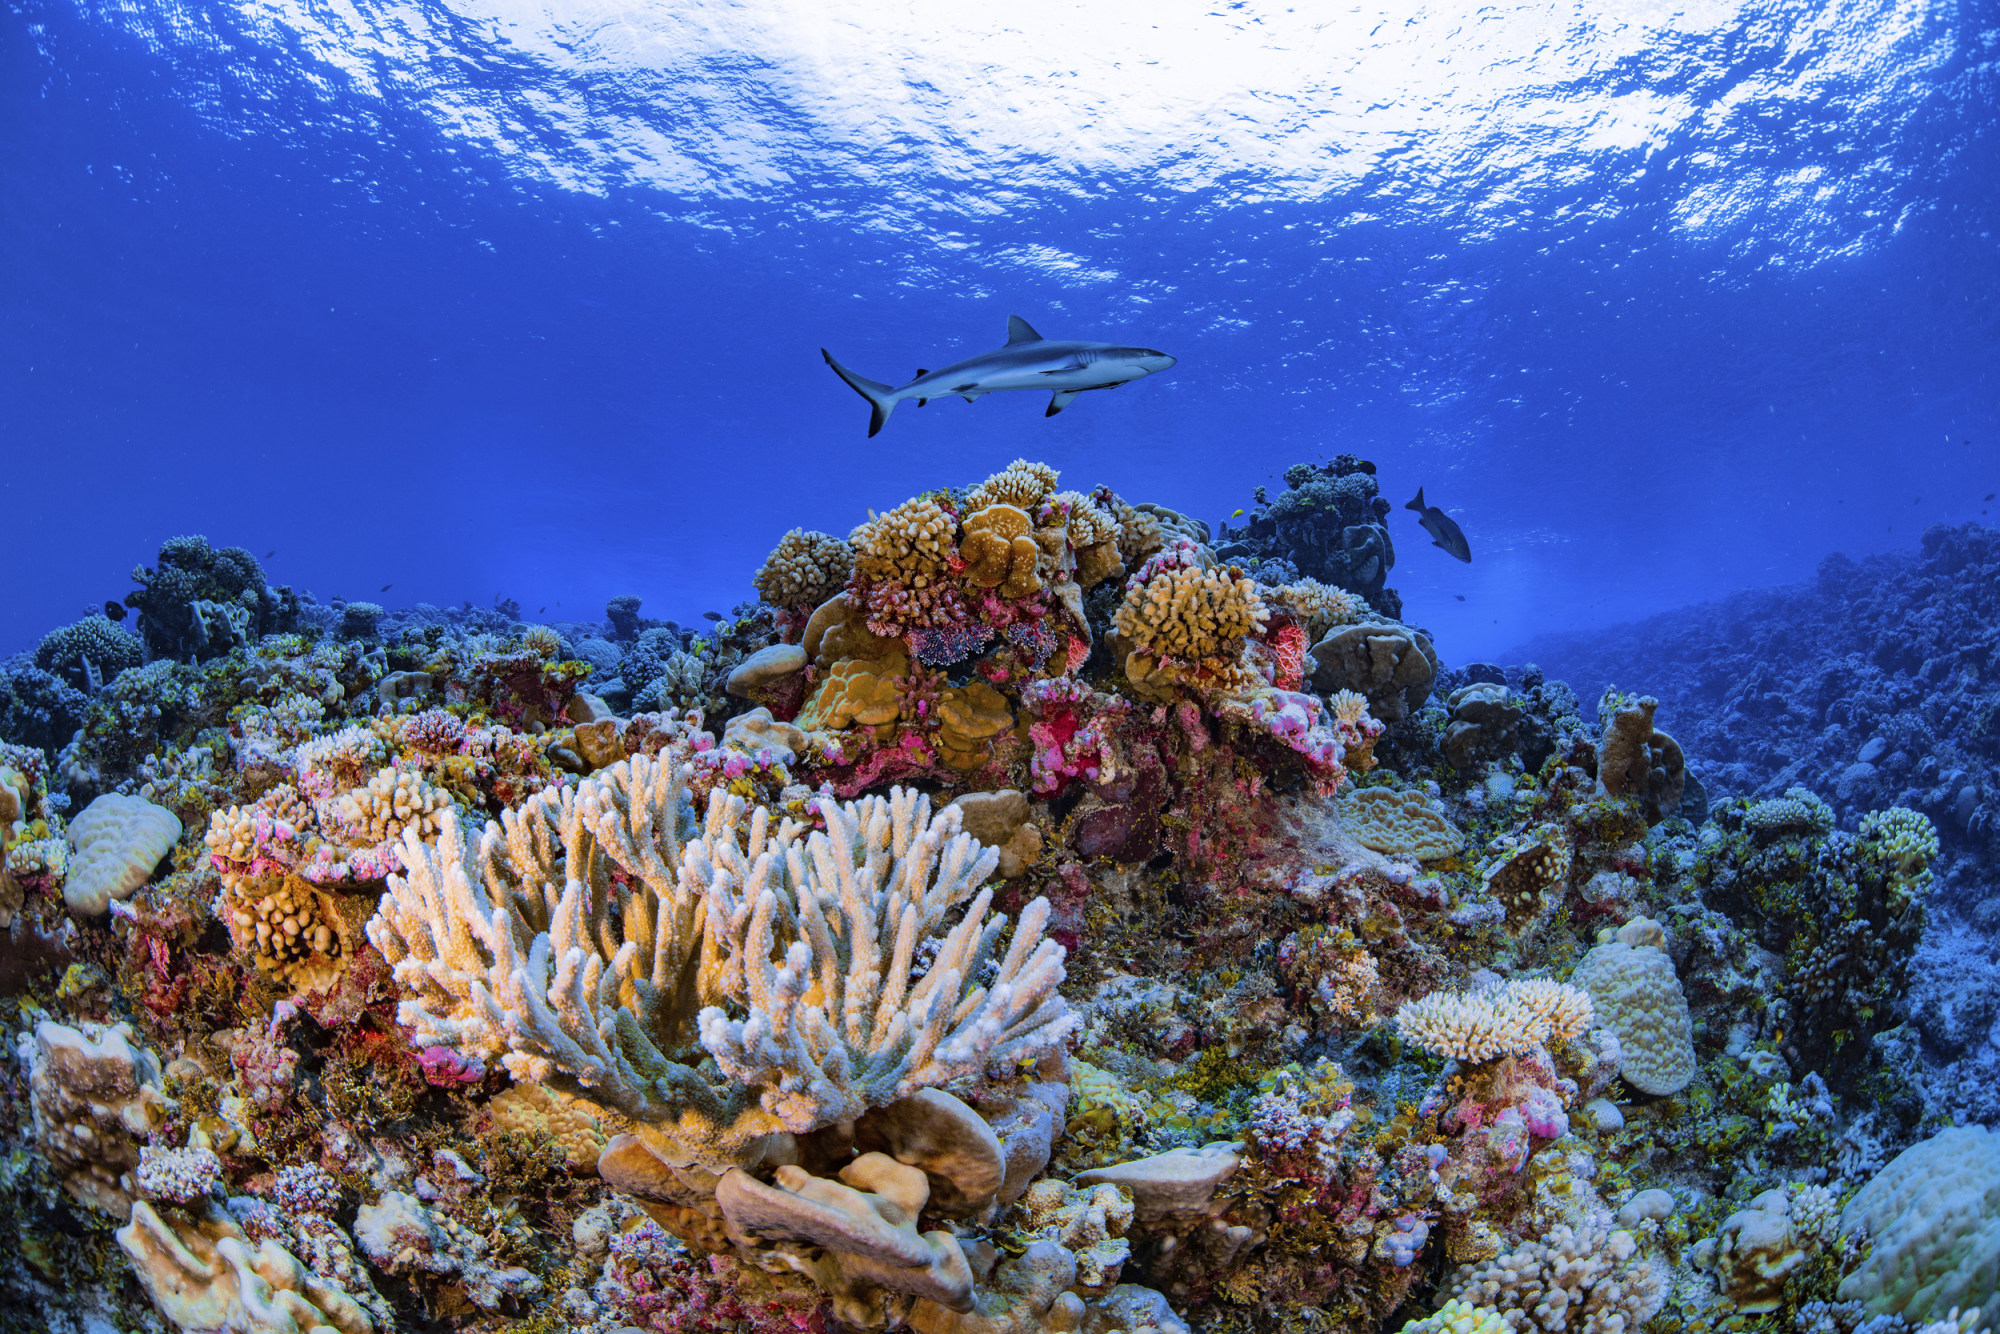 MAP QUEST: Researchers Complete First-Ever Detailed Map of Global Coral